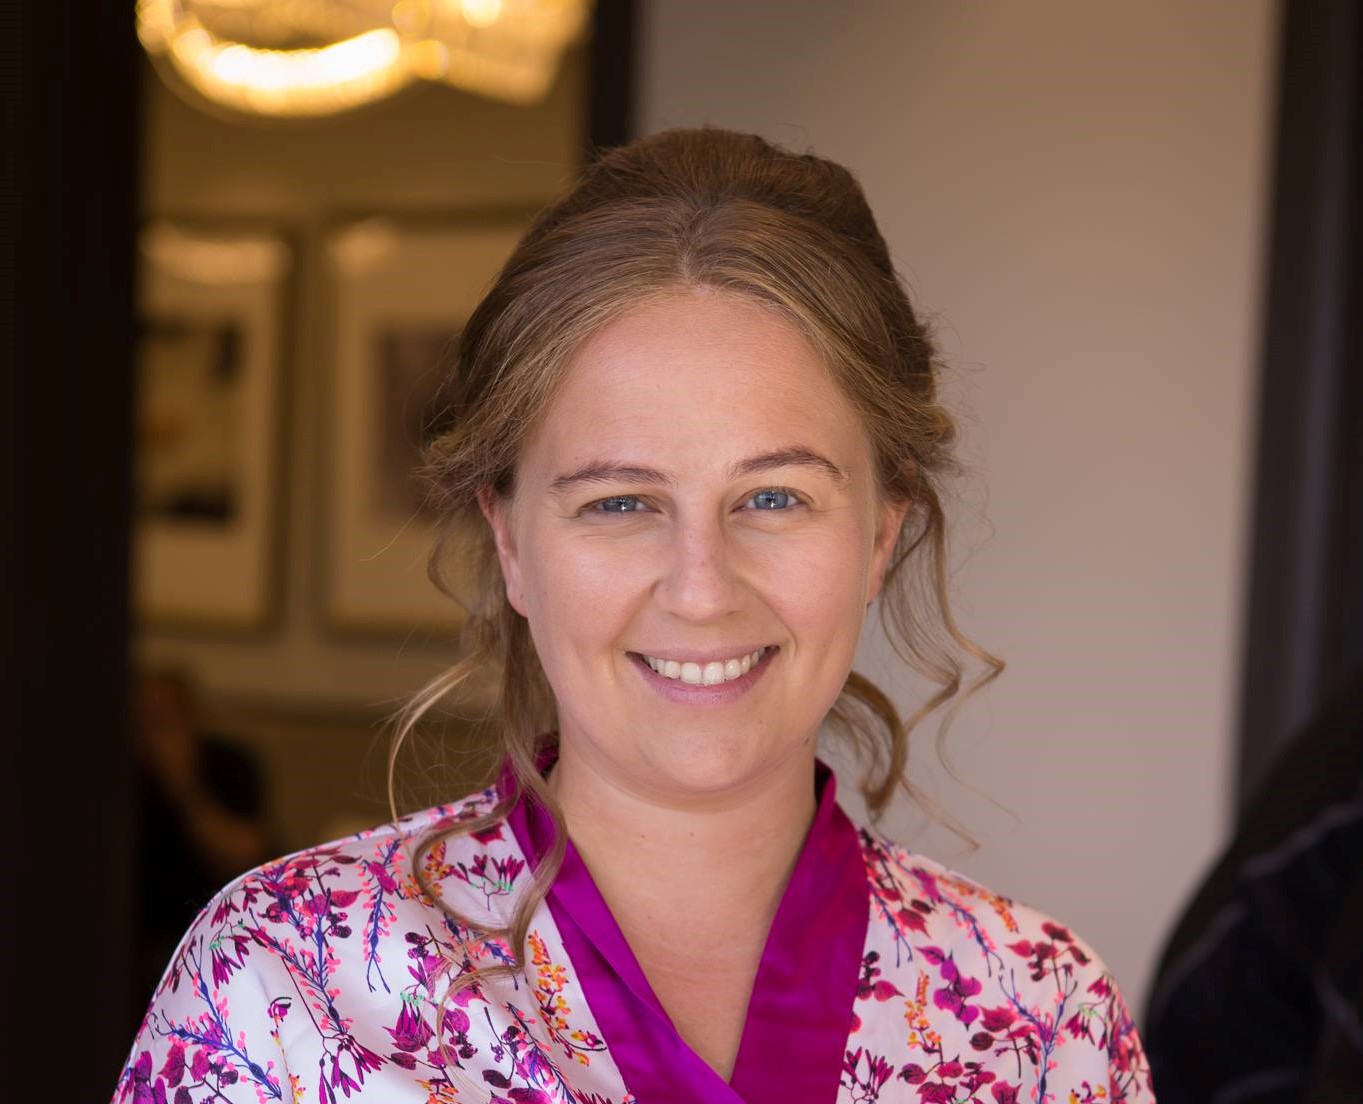 shely esses head shot. smiling female with medium length blonde hair, wearing a flowery white and purple shirt.